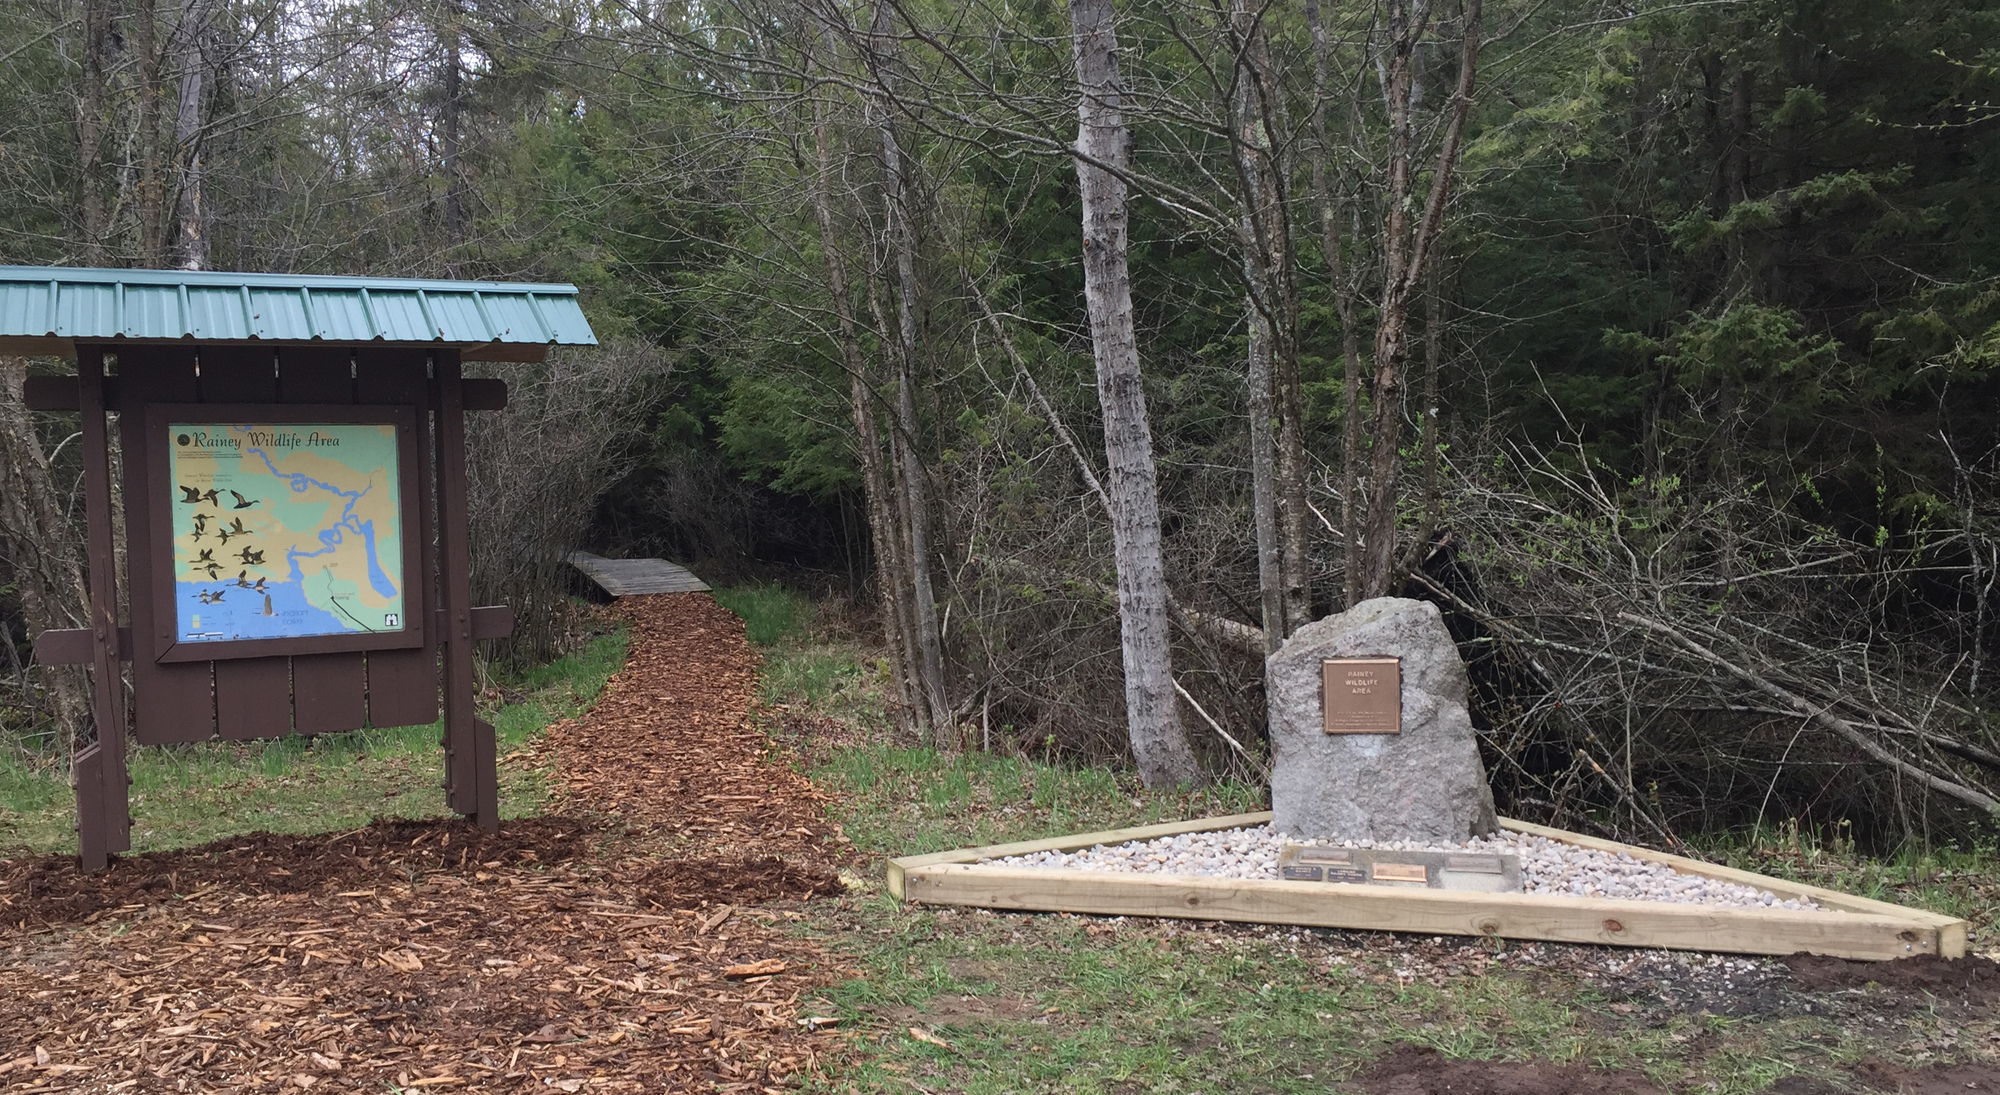 Recent improvements at the Rainey Memorial Wildlife Area in Schoolcraft County include covering a trail with cedar chips and reworking landscaping.